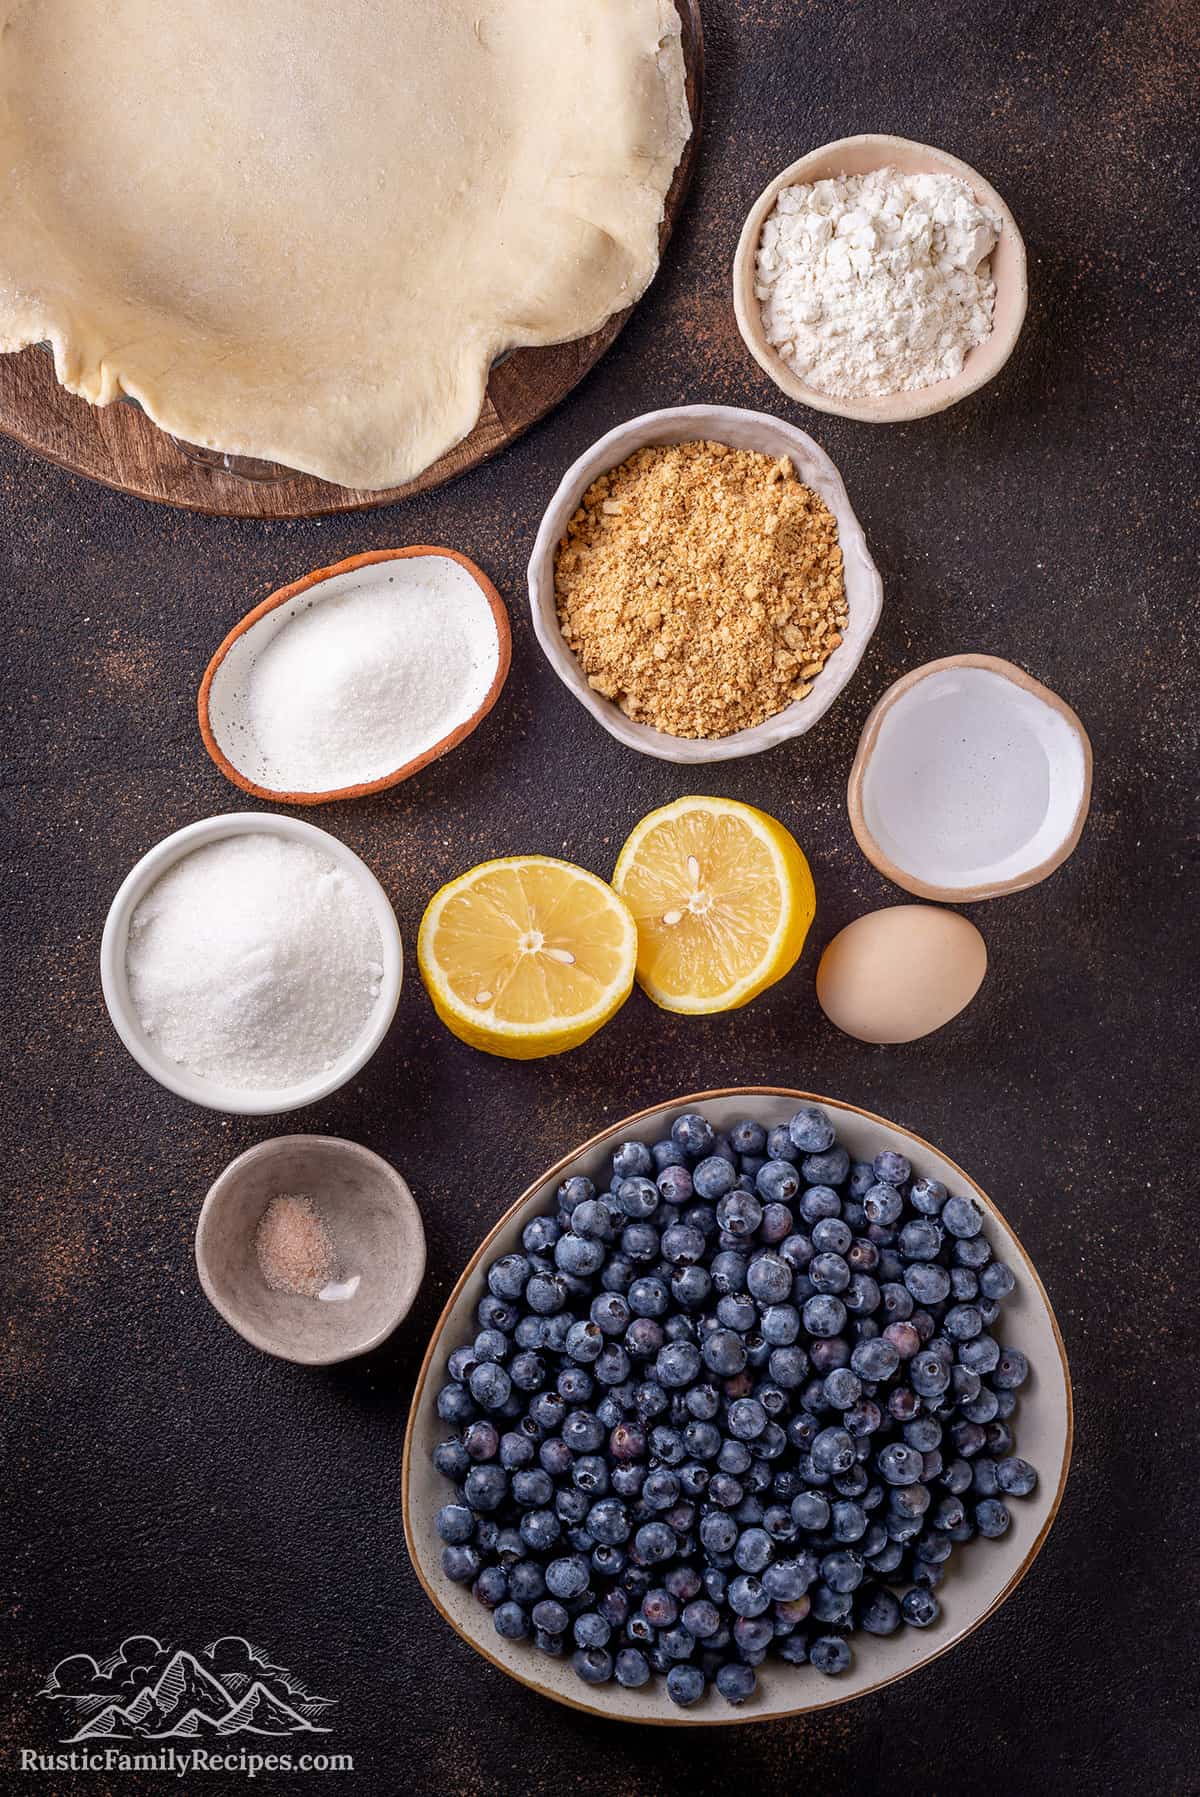 Ingredients for blueberry pie on a wood table